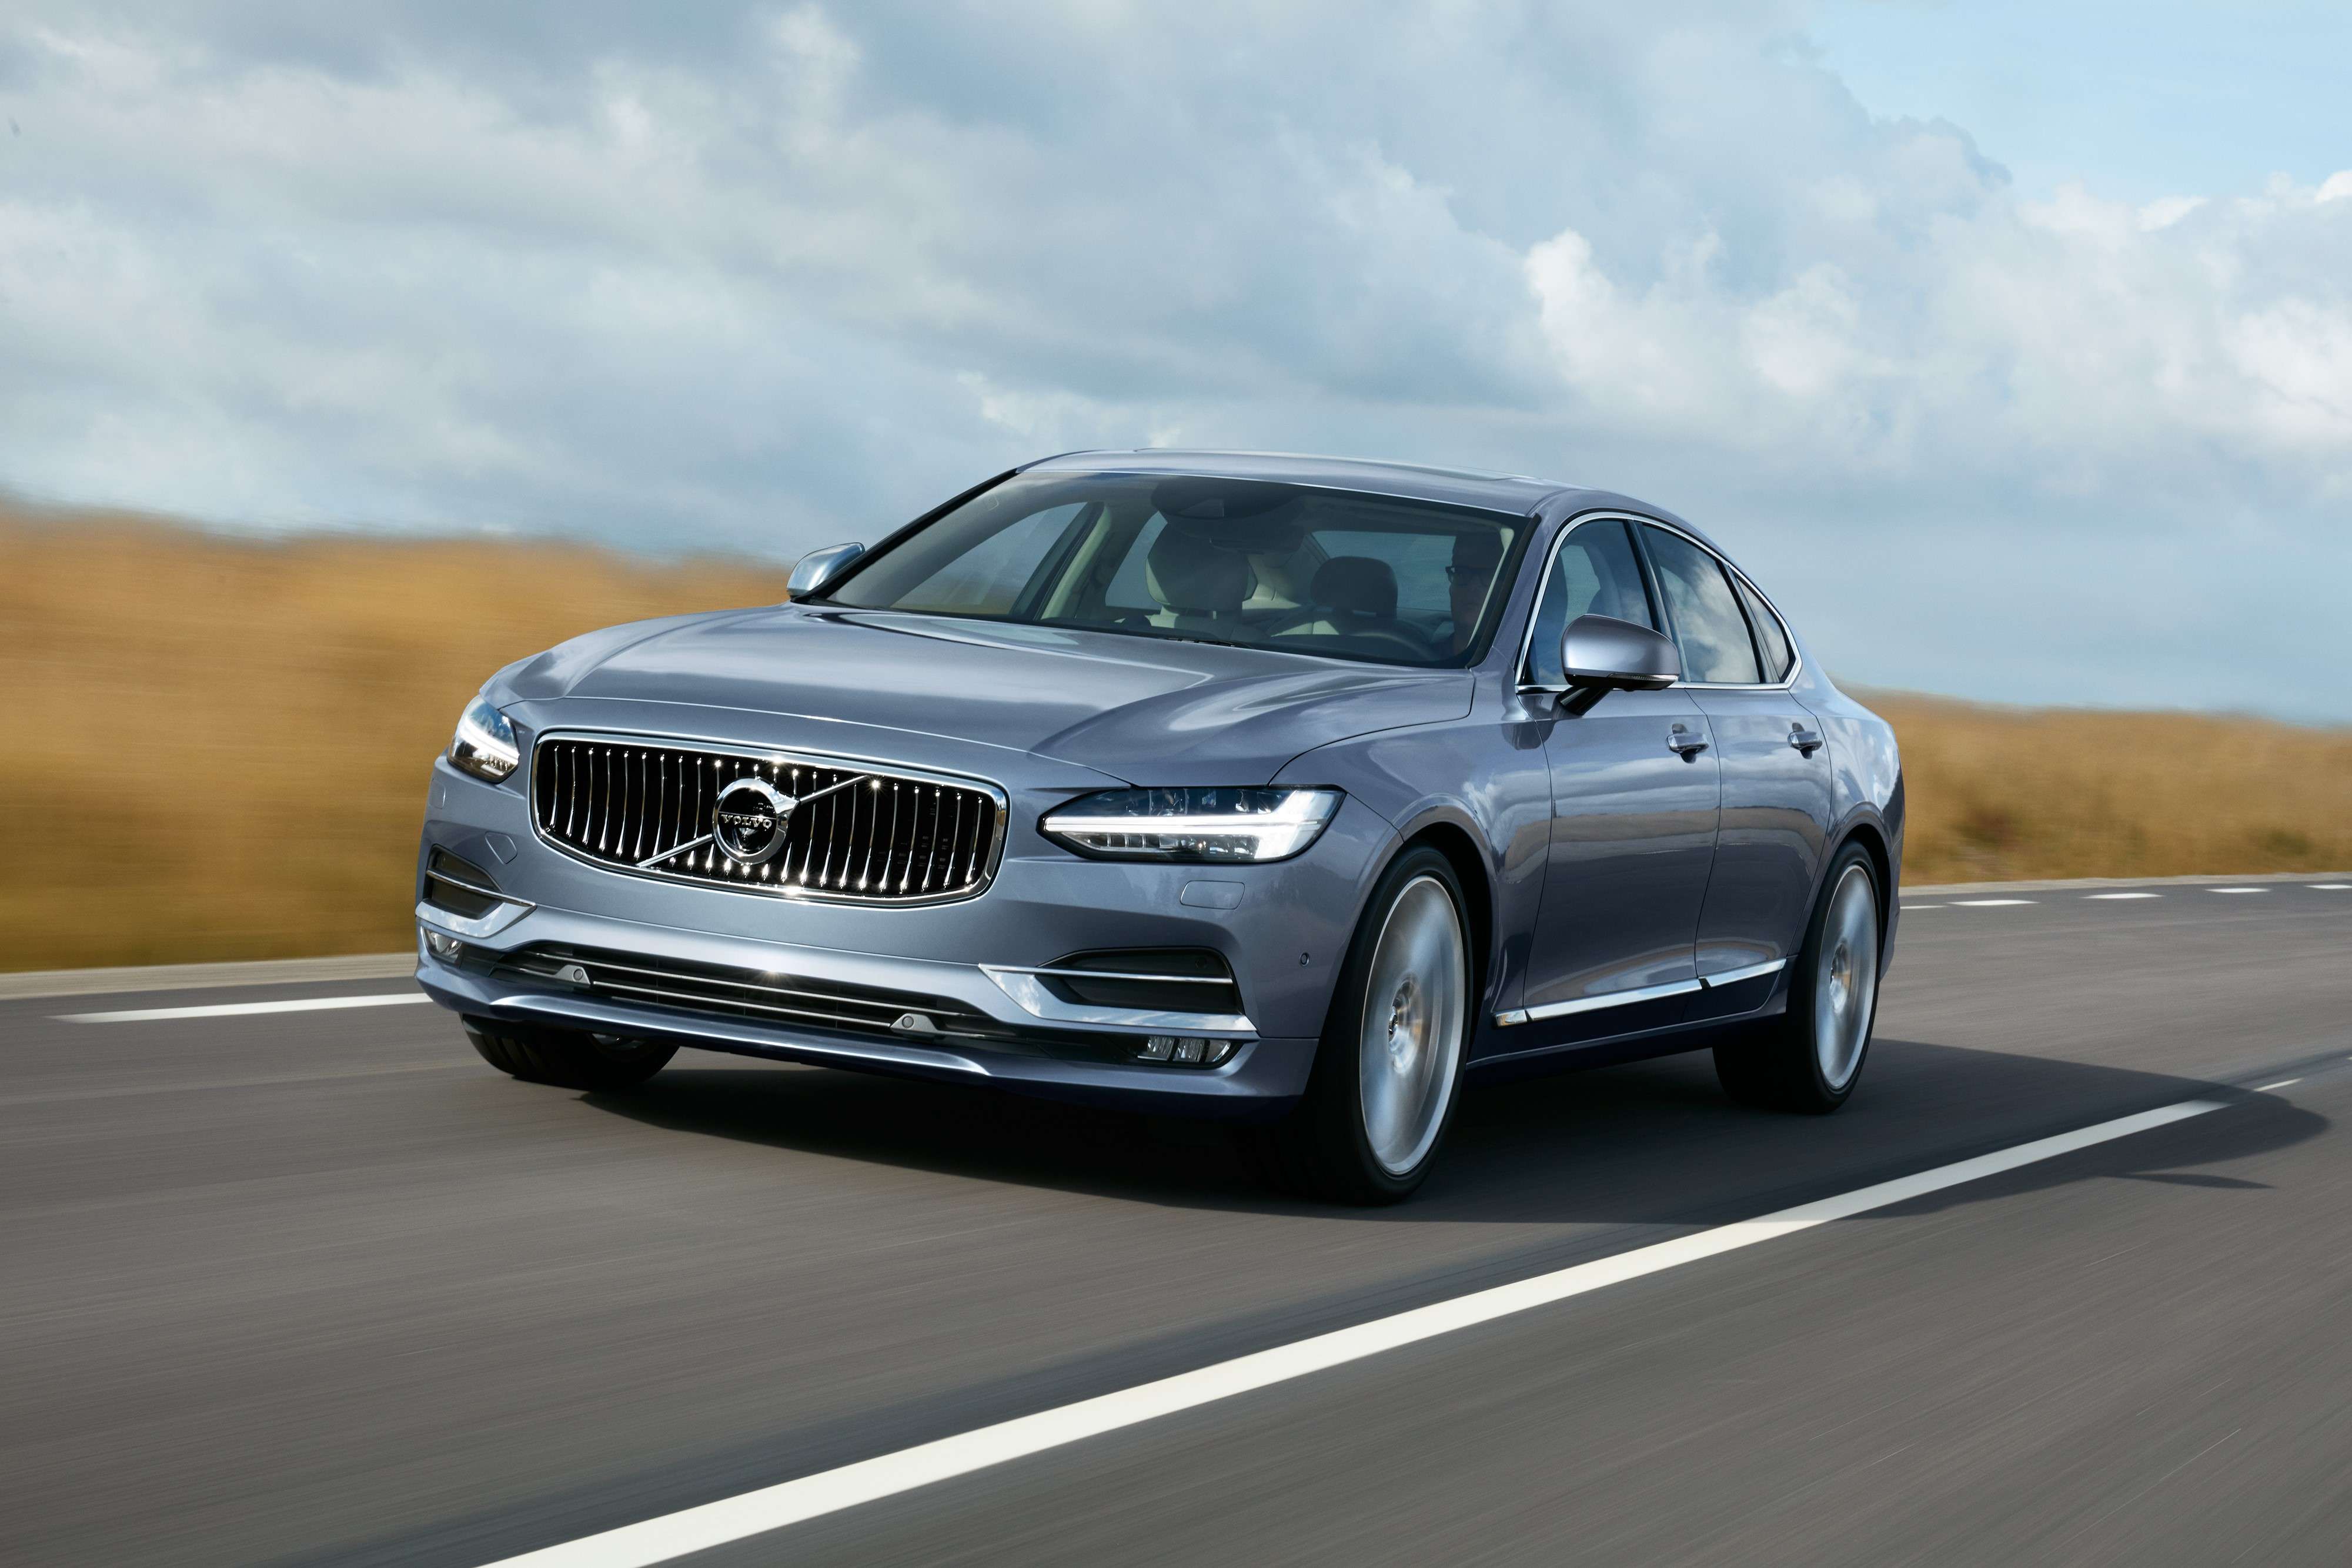 The Volvo S90 packs a four-cylinder, two-litre, turbocharged and supercharged engine, producing 320 horsepower. Photo: SCMP Handout